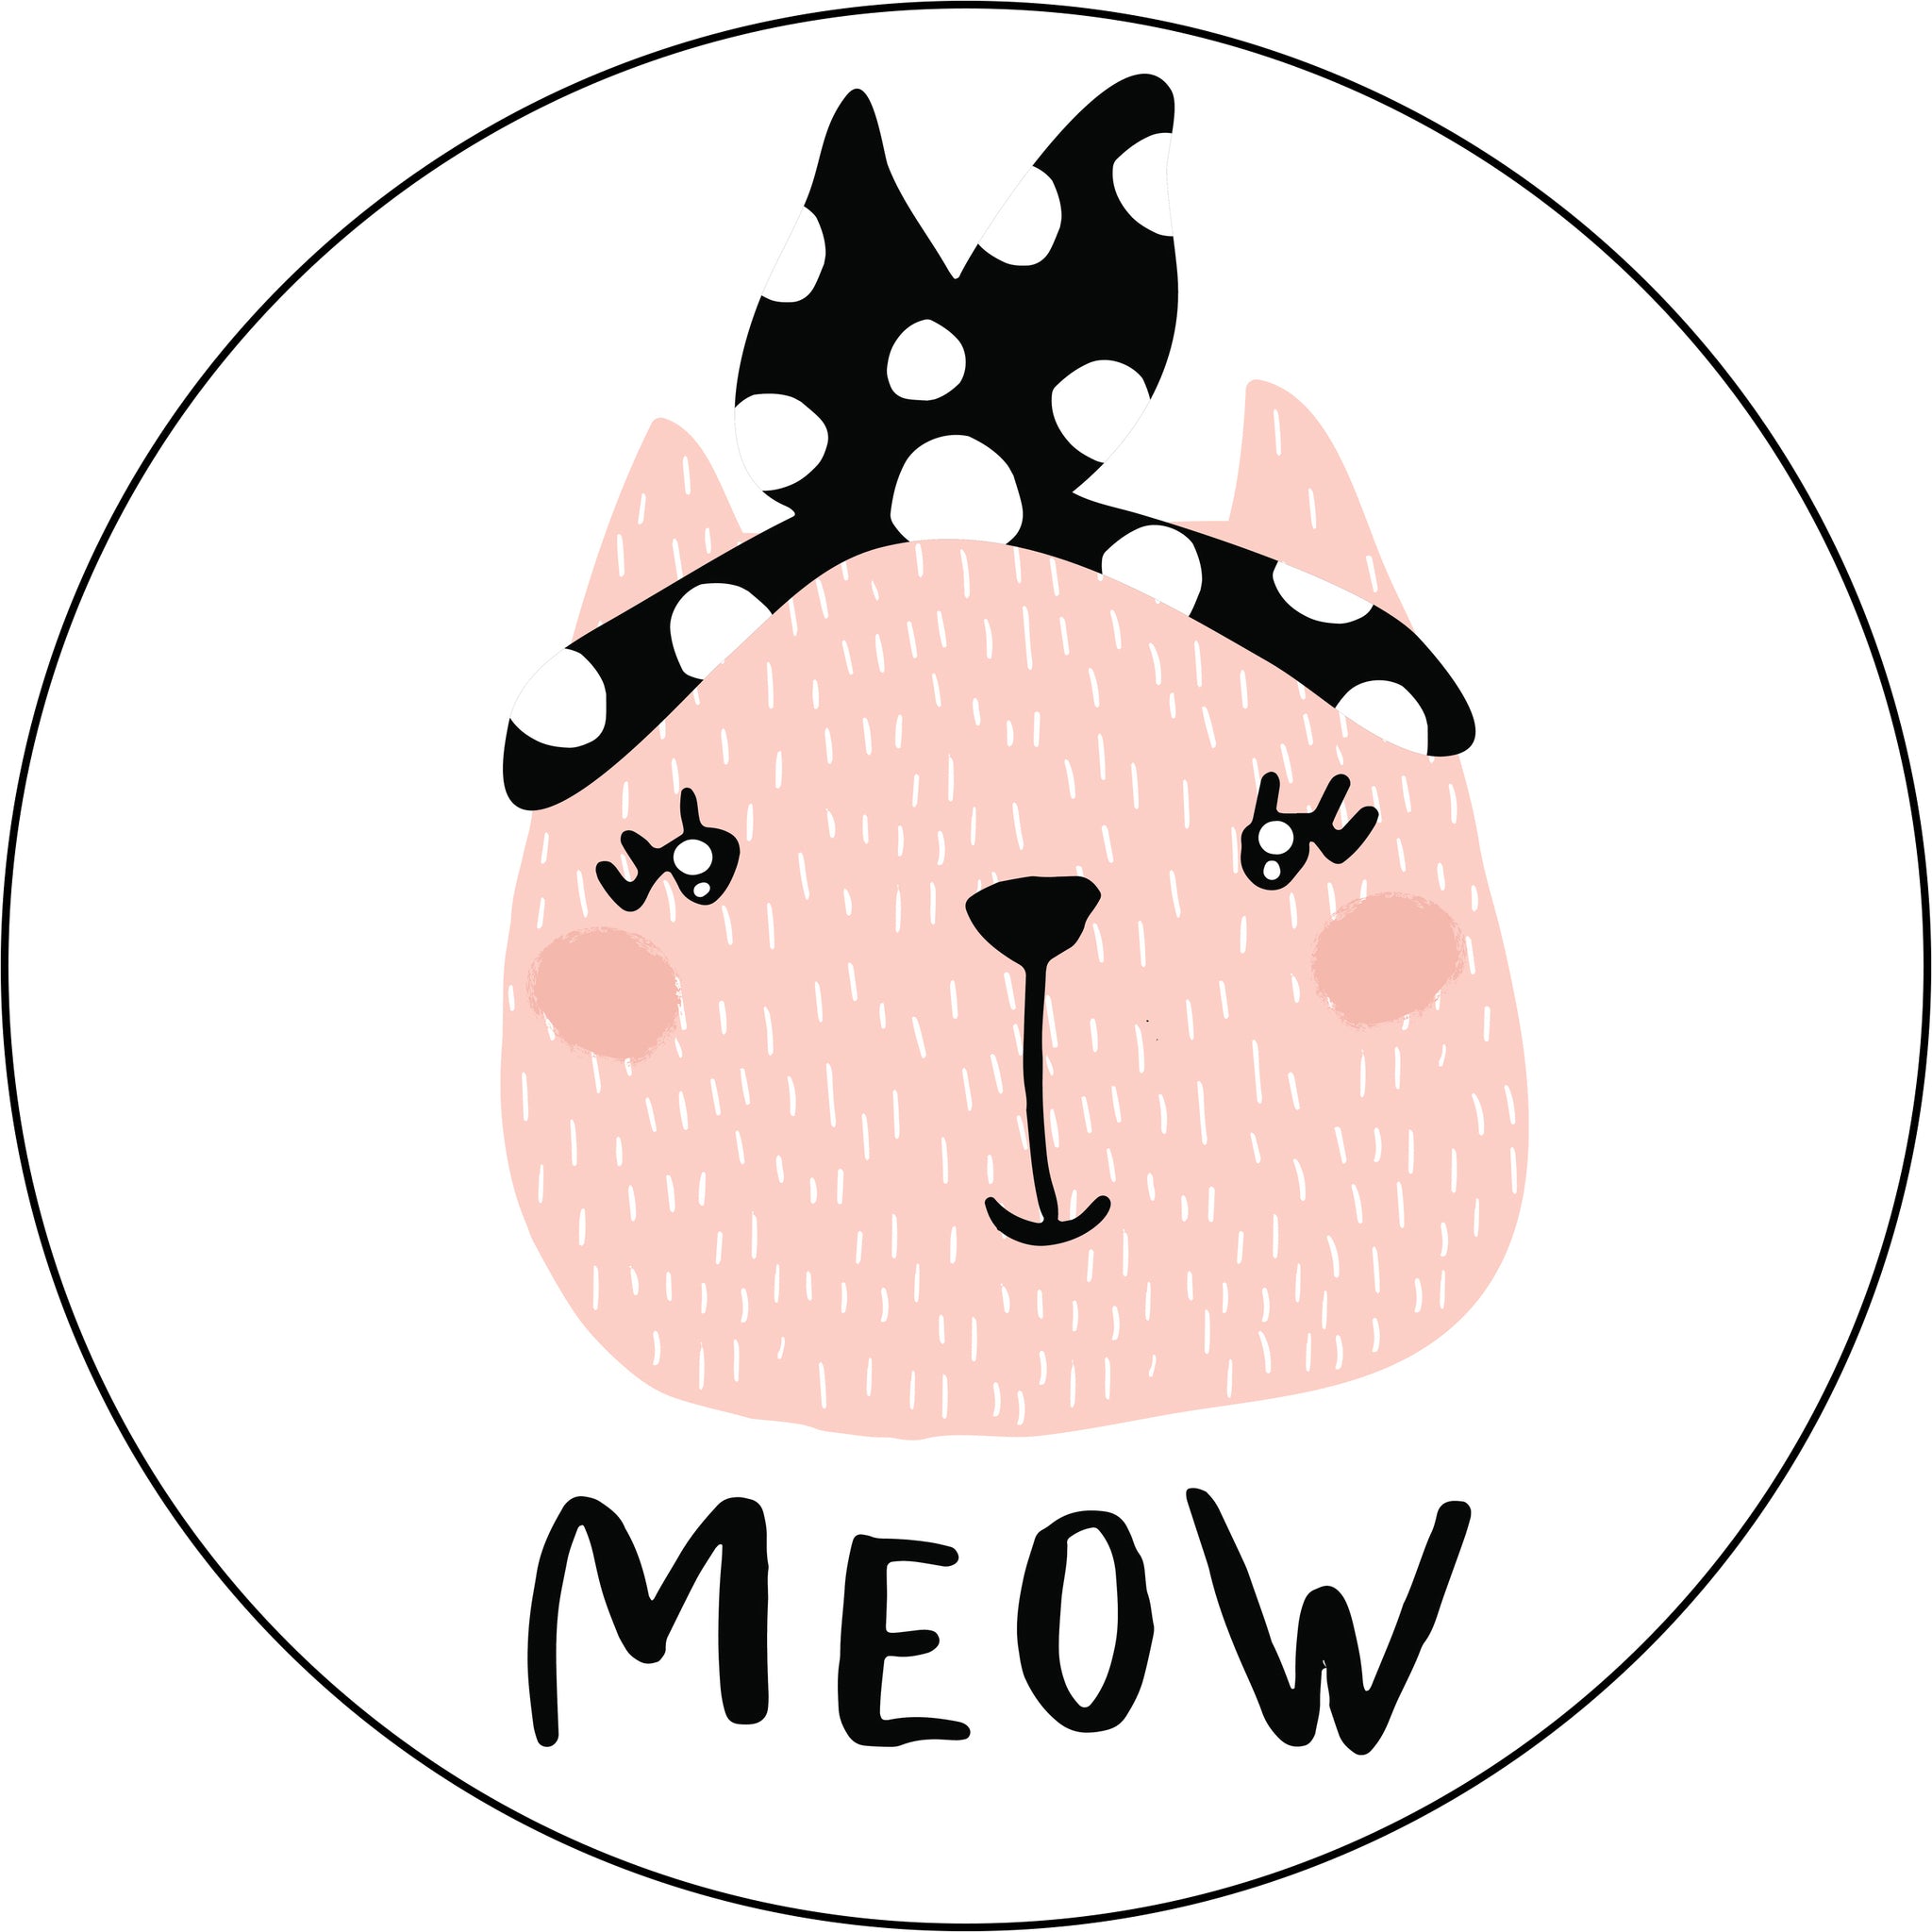 Pretty Adorable Girly Fancy Pink Kitty Cat With Meow Caption Cartoon Vinyl Decal Sticker